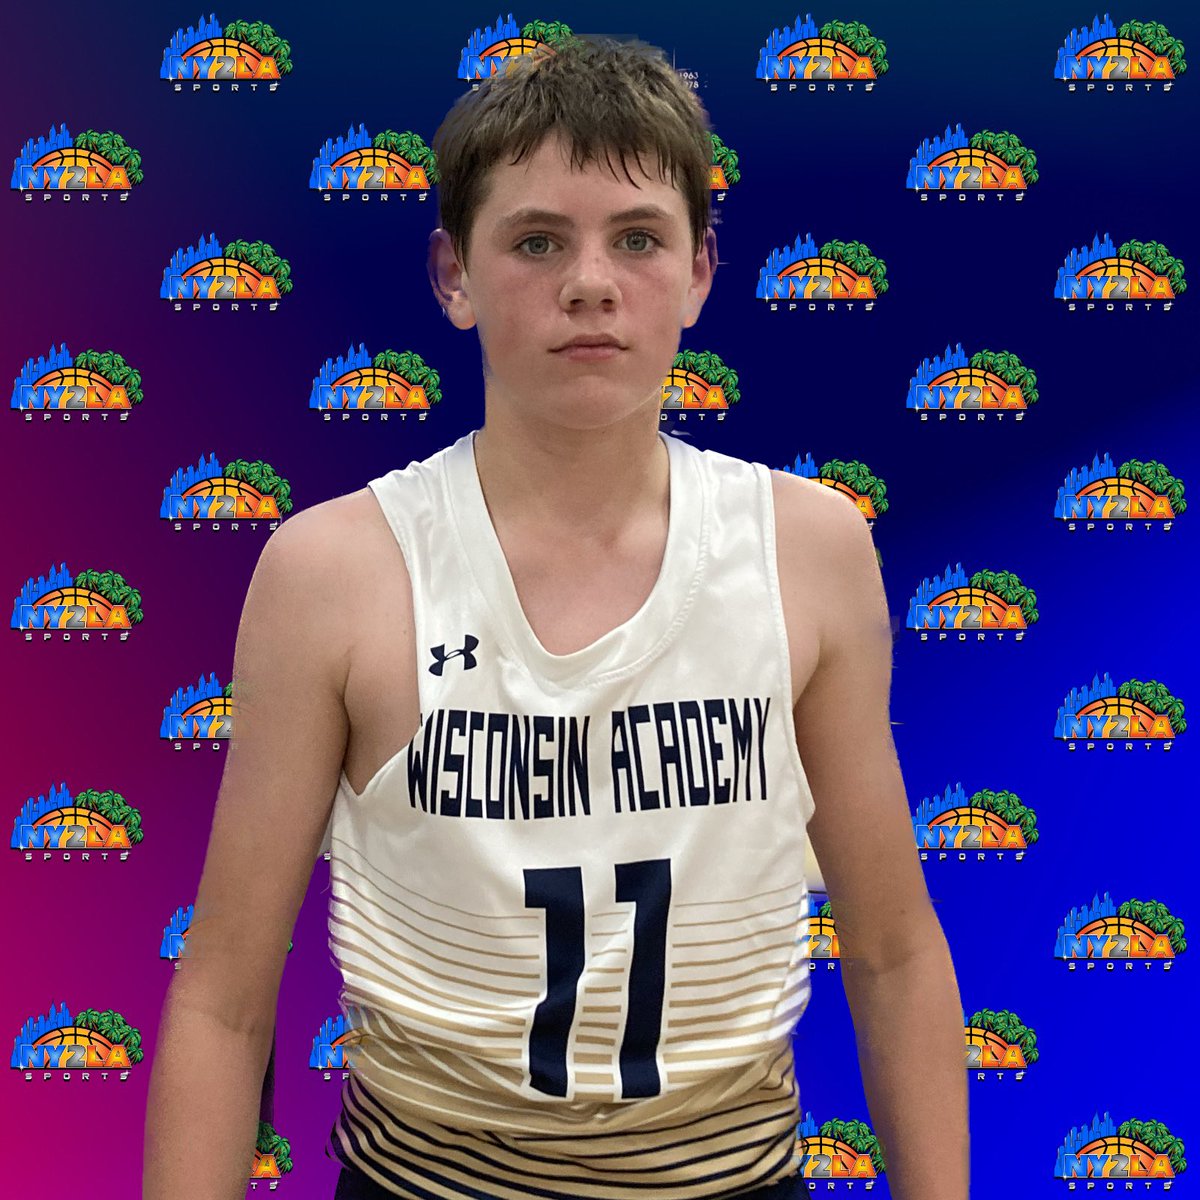 Do it all performance from Brock Weeden leading @WiscoAcademy 12U to a strong win. Scored the ball in bunches from all over but also ran the point, rebounded the ball at a high rate & on defense was coming up with a few steals and blocks @ny2lasports @GNBABASKETBALL